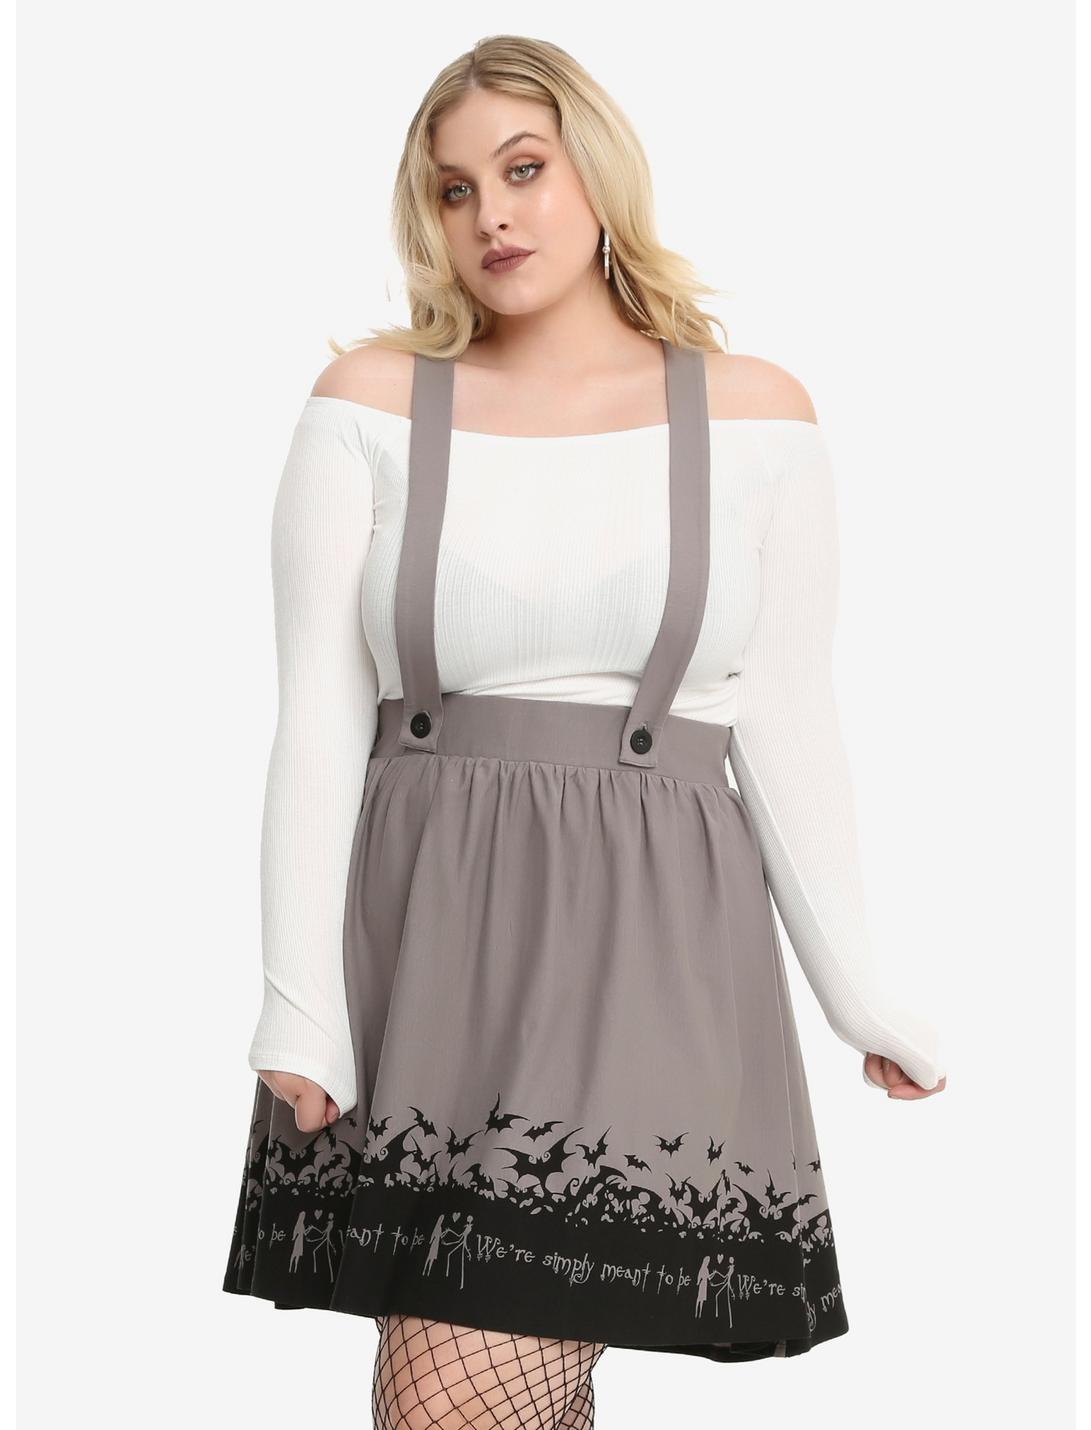 The Nightmare Before Christmas Simply Meant To Be Suspender Skirt Plus Size, GREY, hi-res